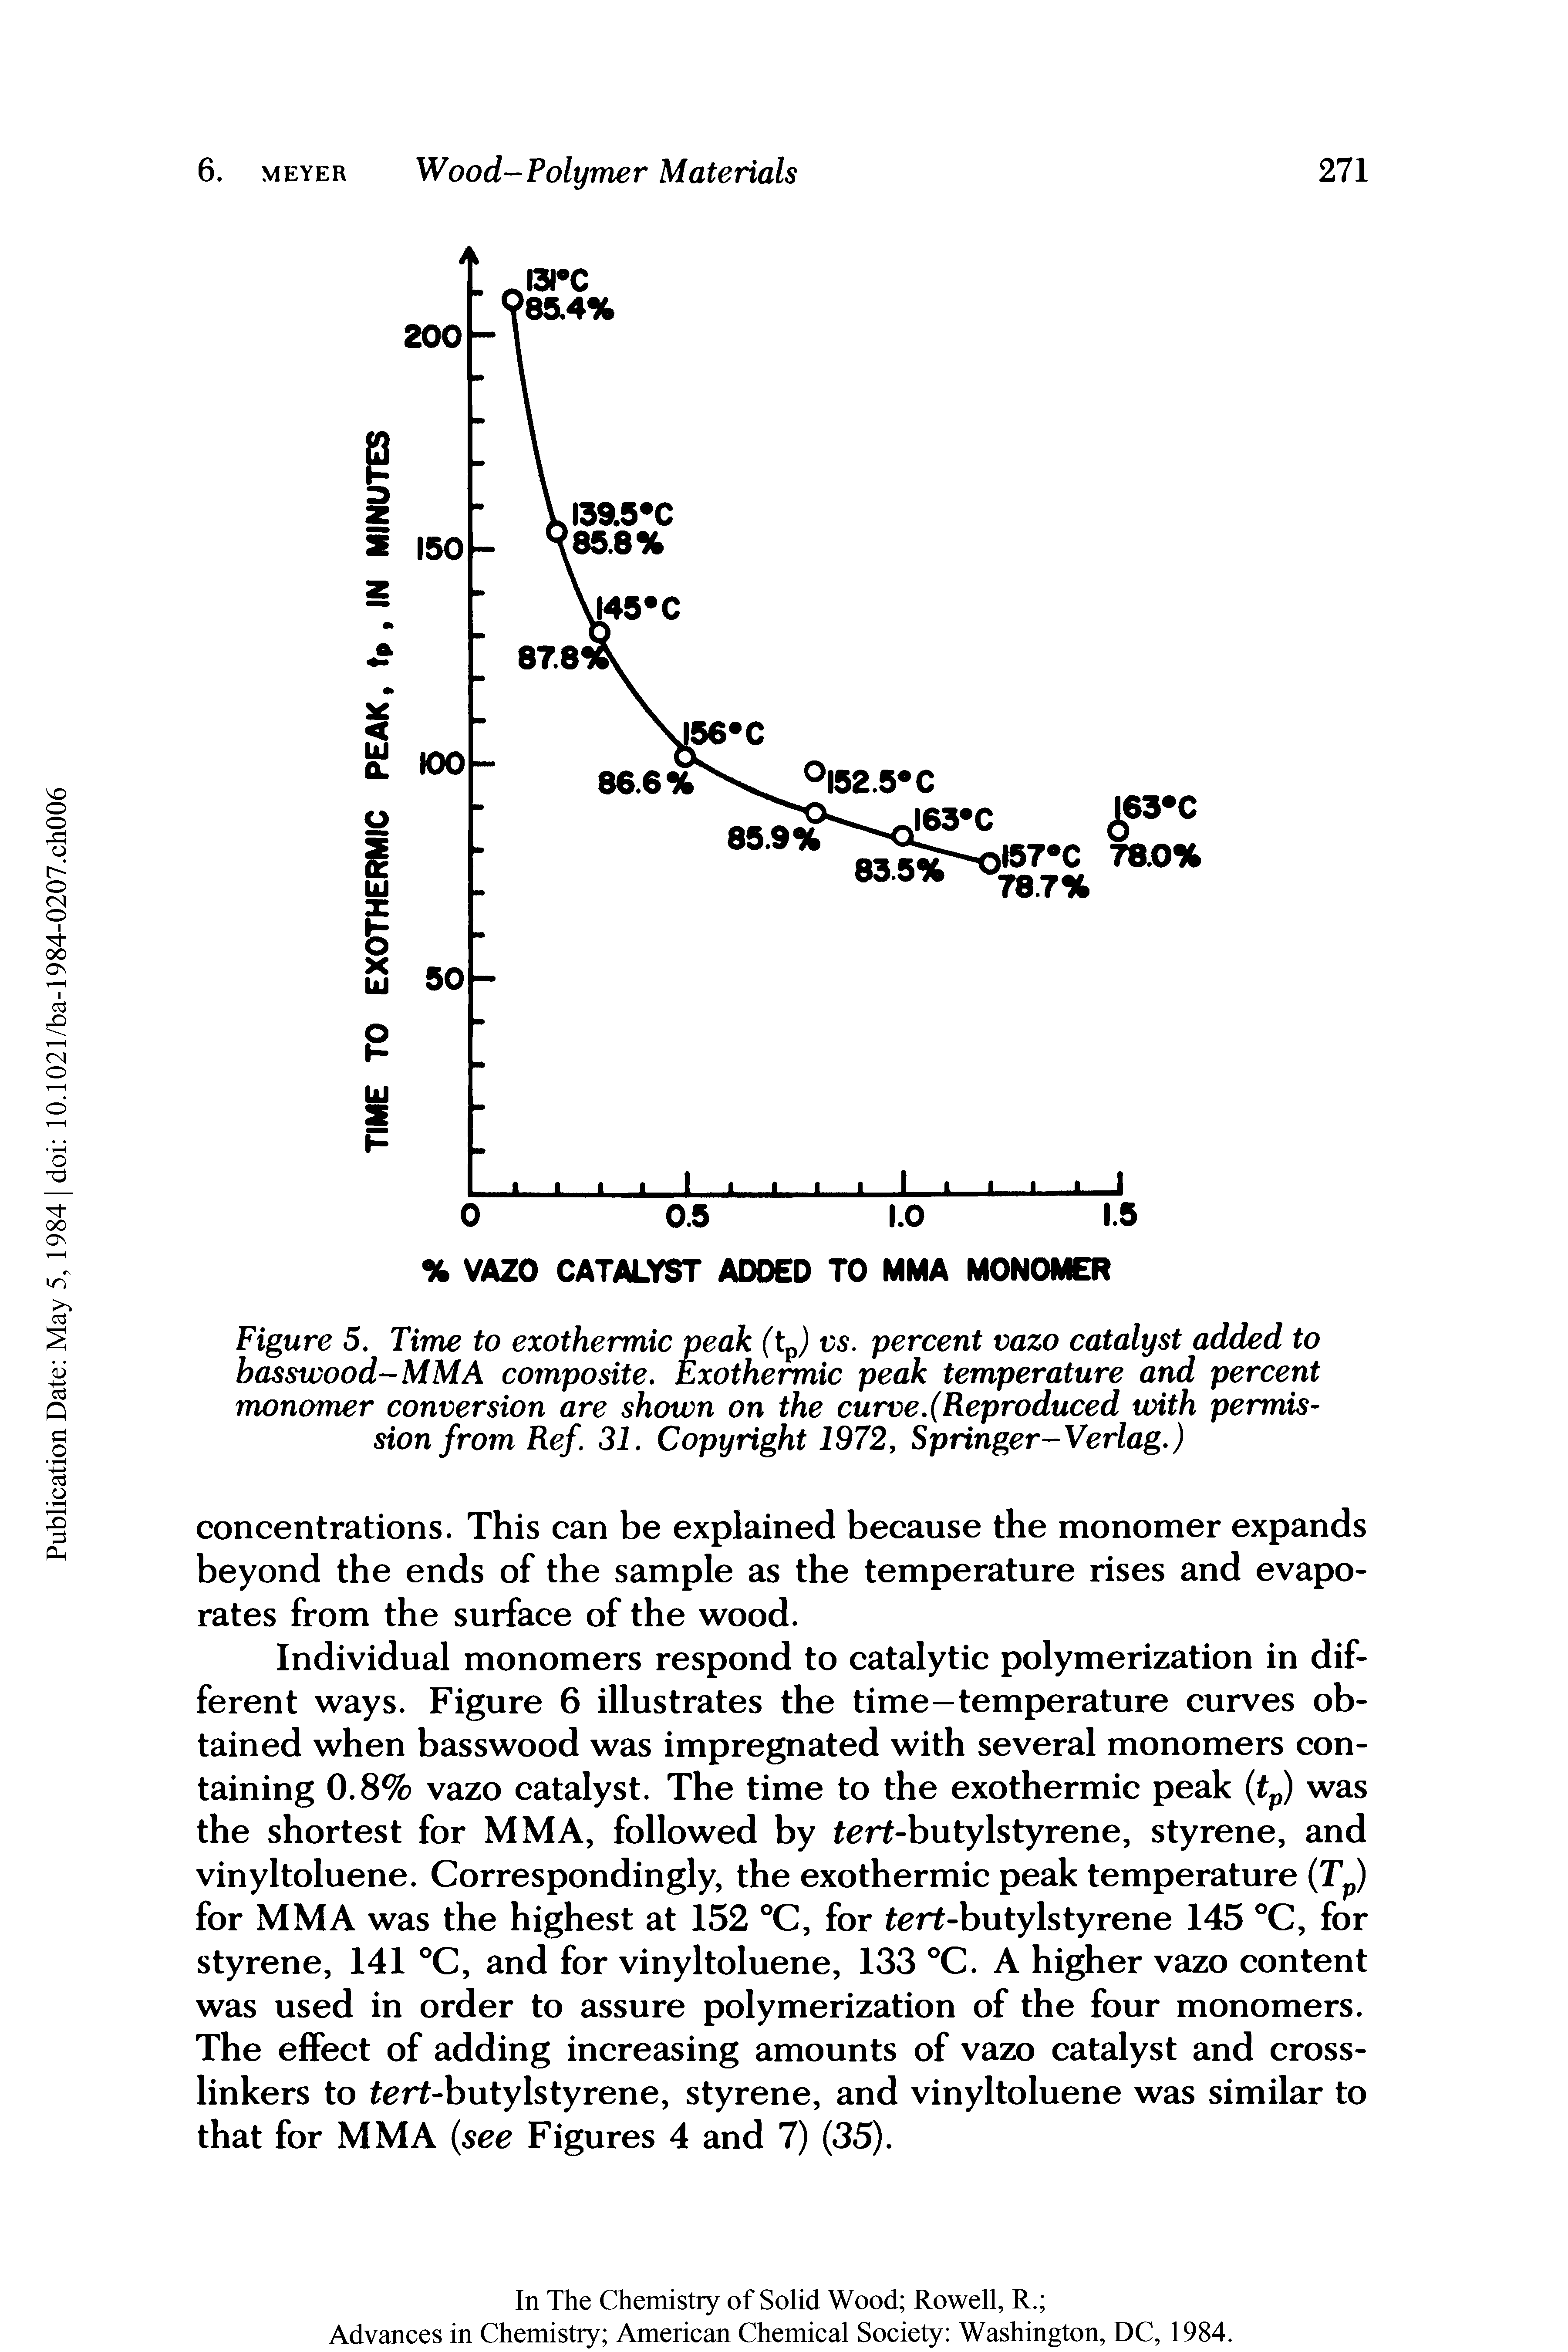 Figure 5. Time to exothermic peak (tp) vs. percent vazo catalyst added to basswood-MMA composite. Exothermic peak temperature and percent monomer conversion are shown on the curve.(Reproduced with permiS sion from Ref. 31. Copyright 1972, Springer-Verlag.)...